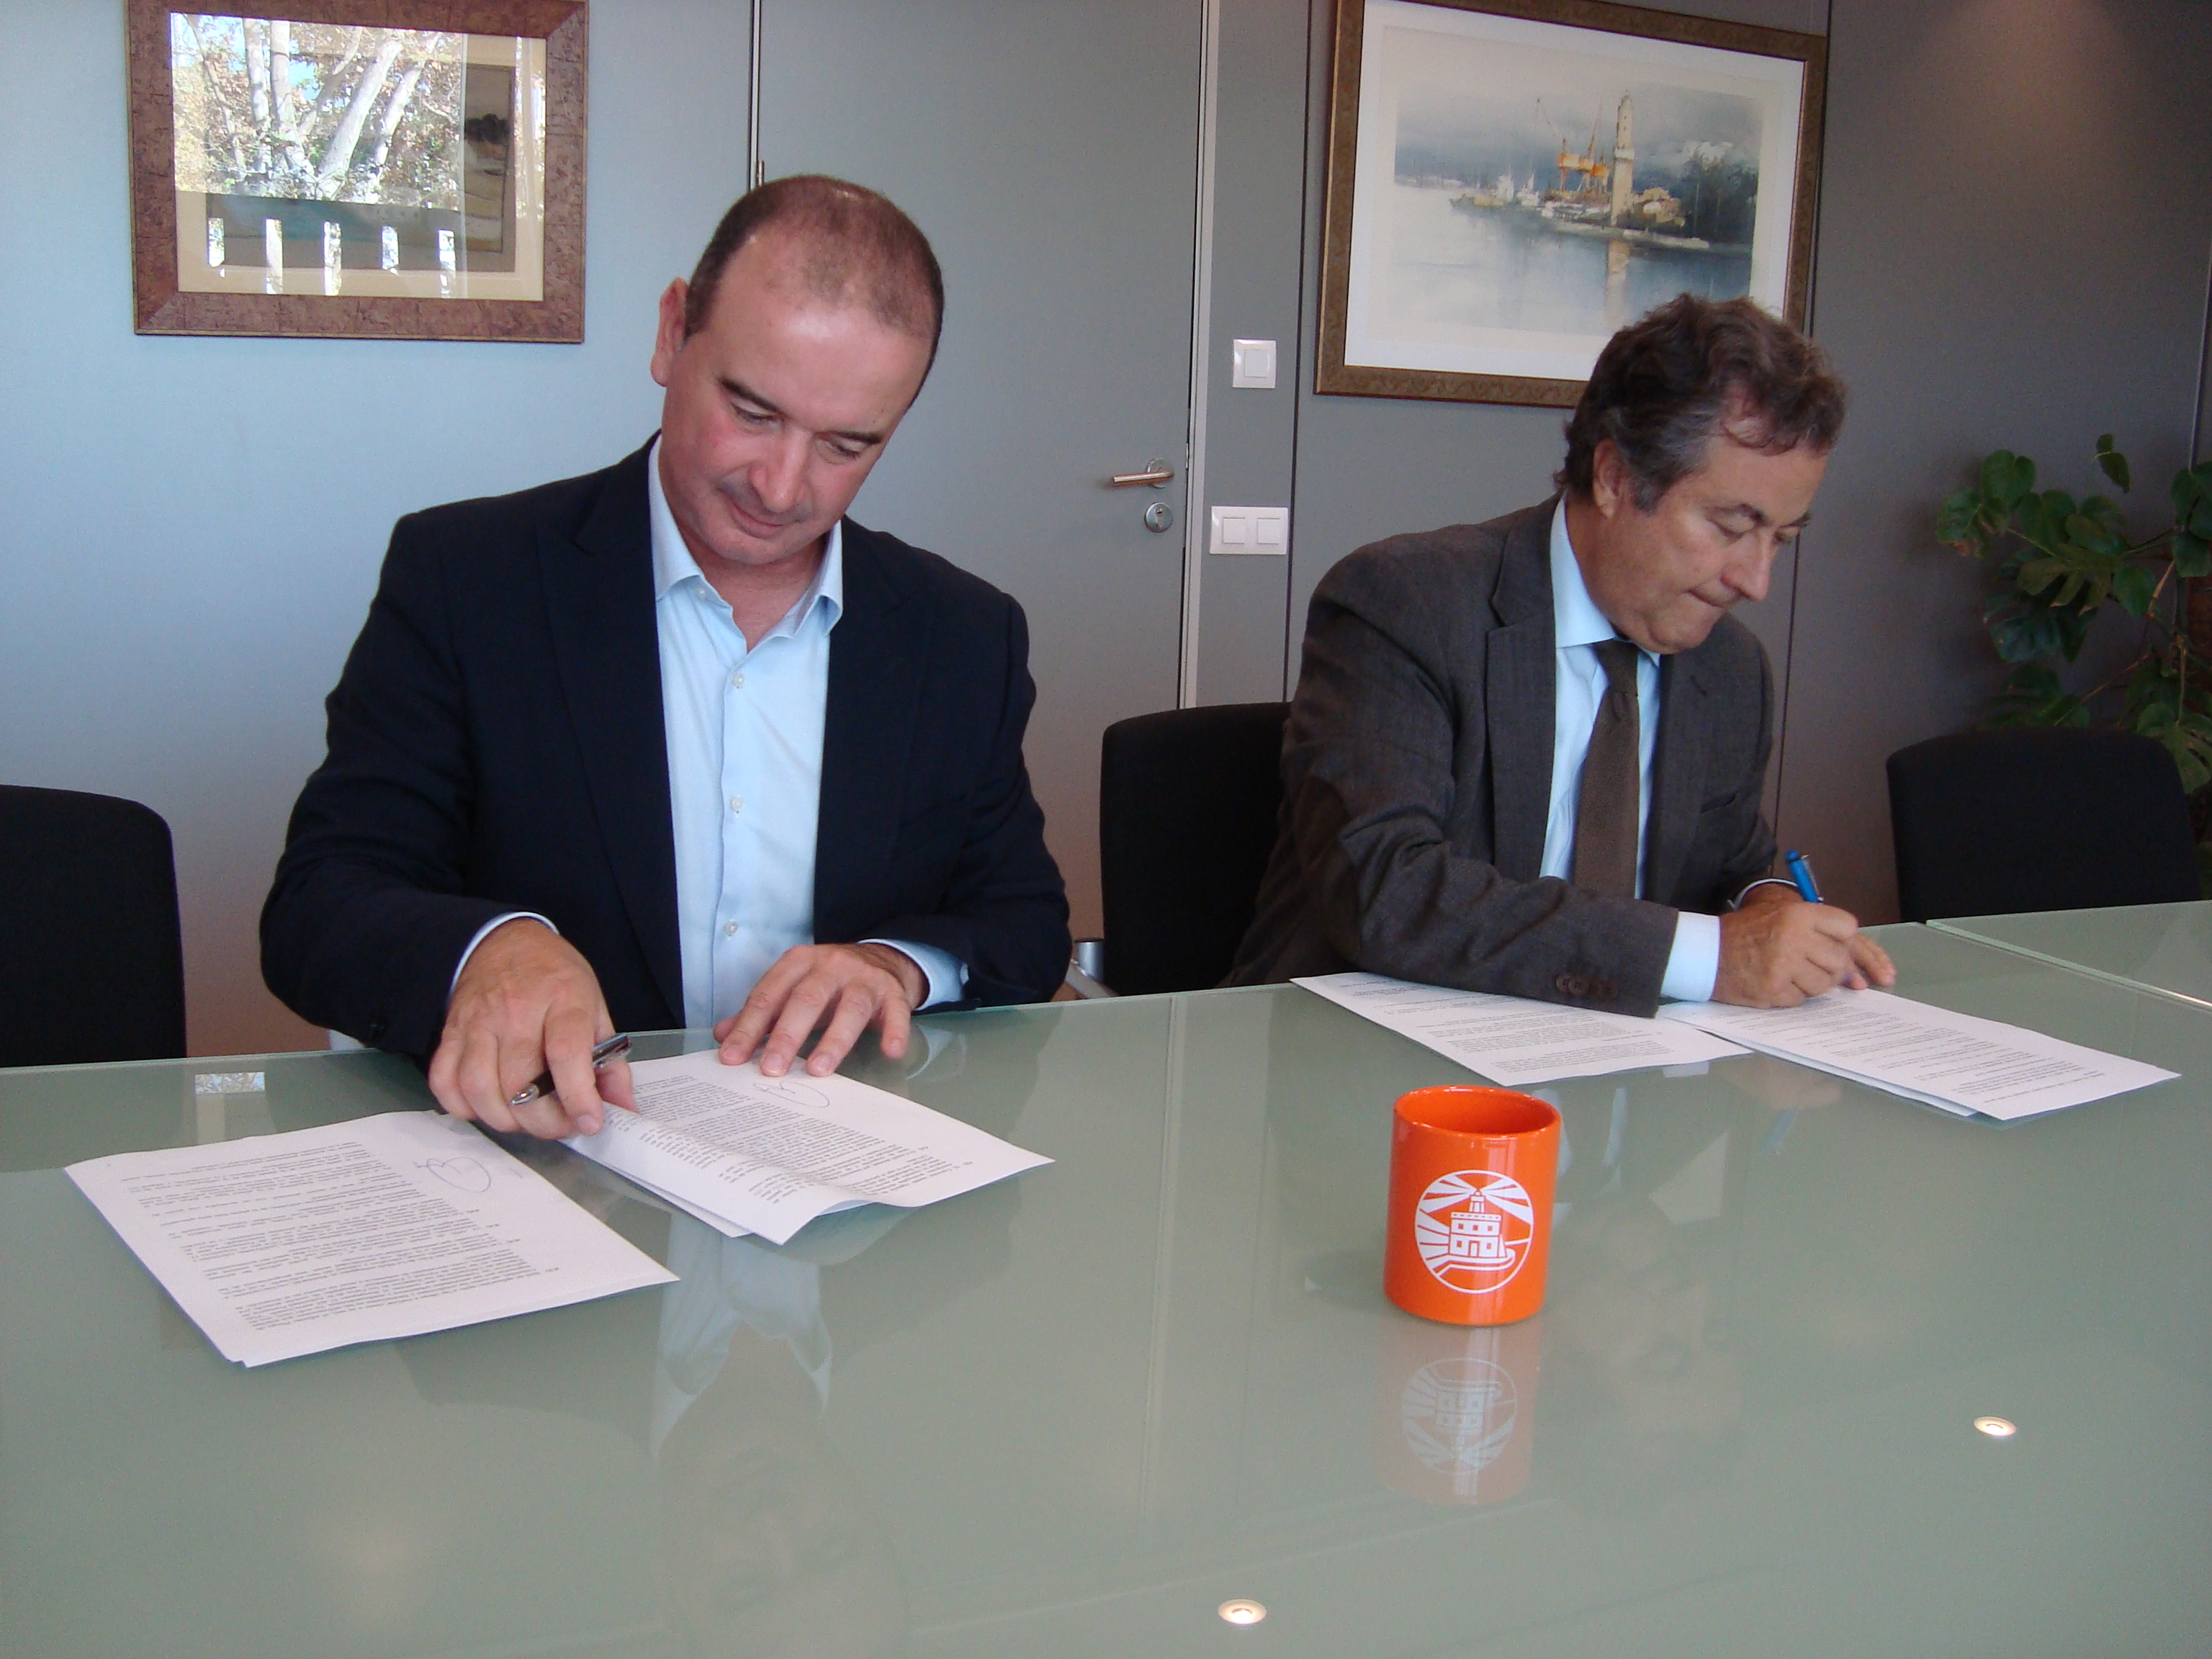 The APB and Formentera Island Council sign agreement for the transfer of La Mola lighthouse for cultural and museum activities